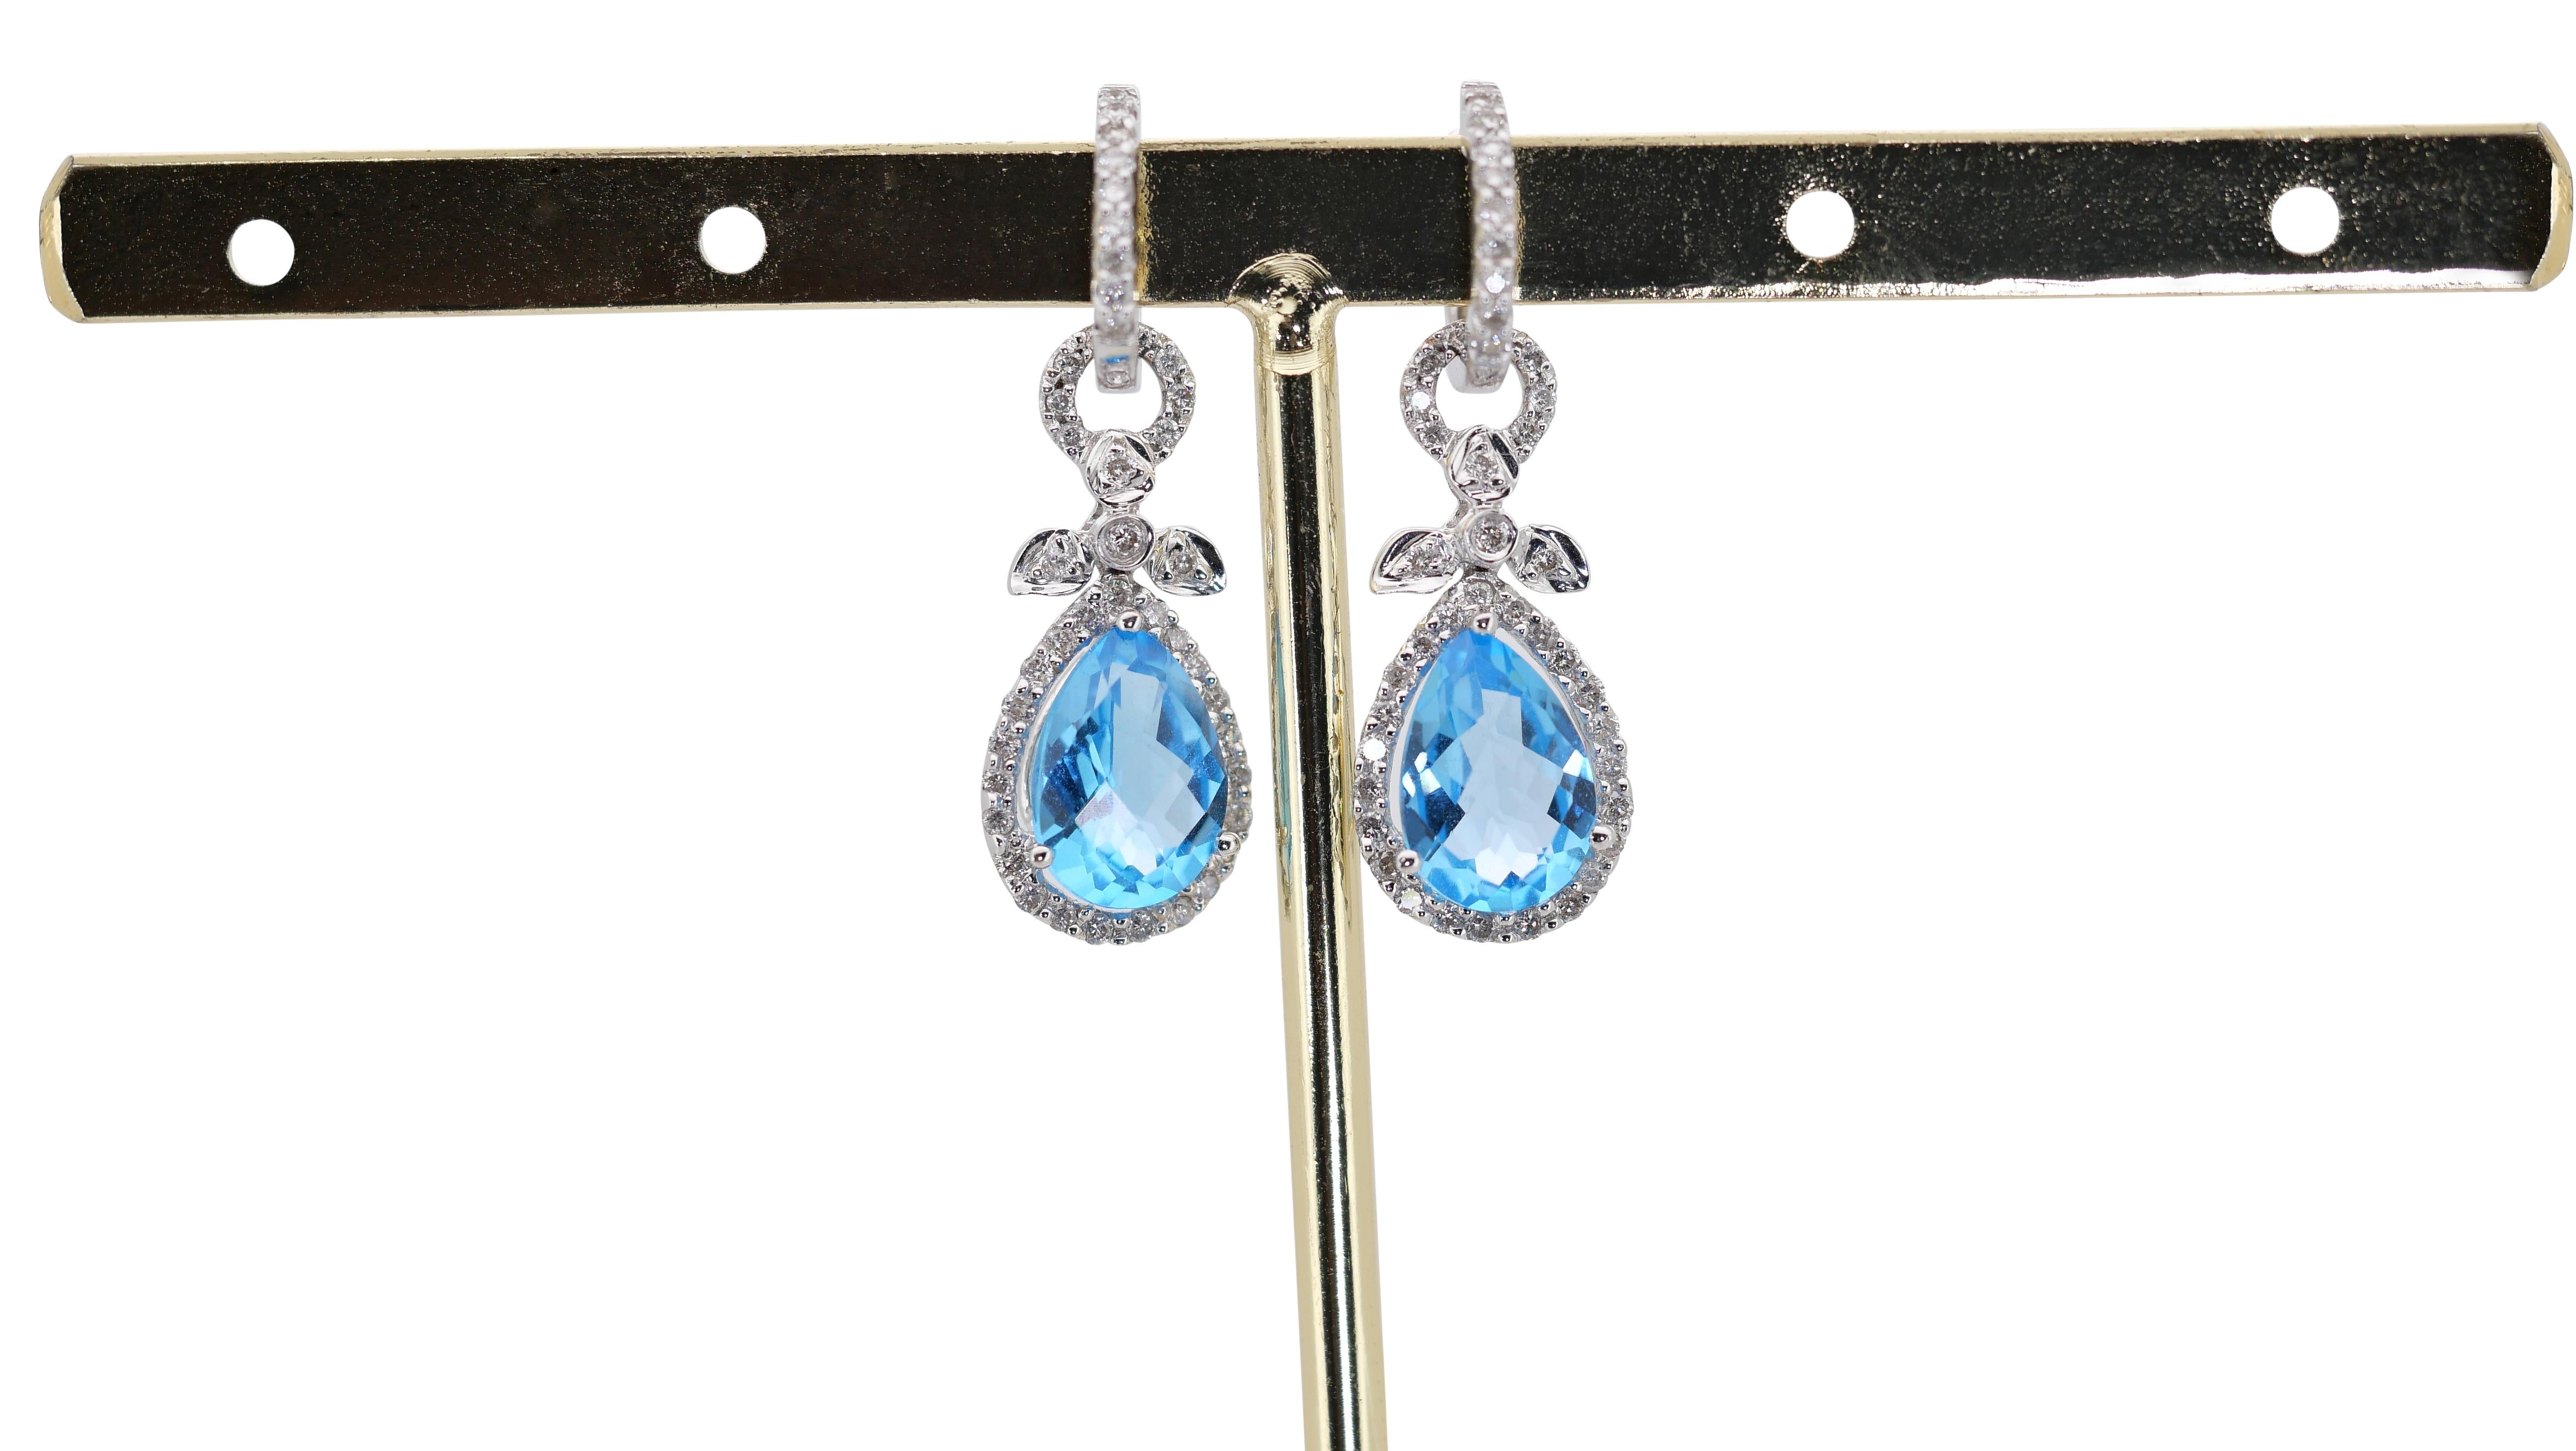 Pear Cut Luxurious 18k White Gold Dangle Earrings with 5 Carat Natural Topaz and Diamonds